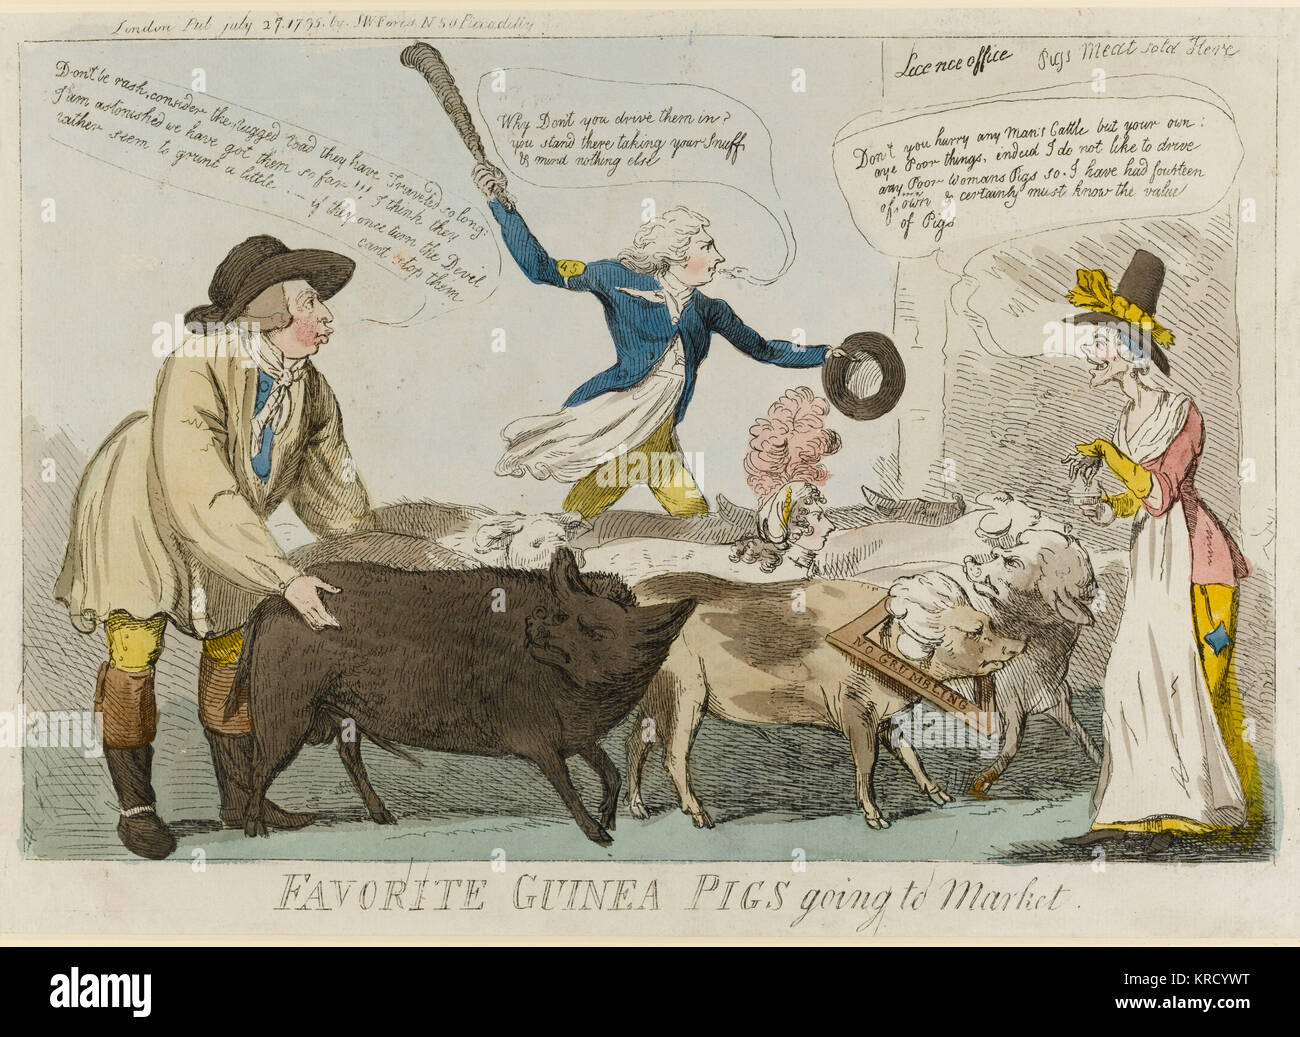 Satirical cartoon, Favorite Guinea Pigs going to market.  King George III in farmer's garb assisted by a drover, Pitt, drives a herd of pigs towards a building inscribed 'Licence office' and 'Pigs Meat sold Here'.  Among the herd is a resentful-looking pig wearing a yoke inscribed 'No Grumbling'.  Another satire on the guinea tax on licences to wear hair powder.     Date: 1795 Stock Photo